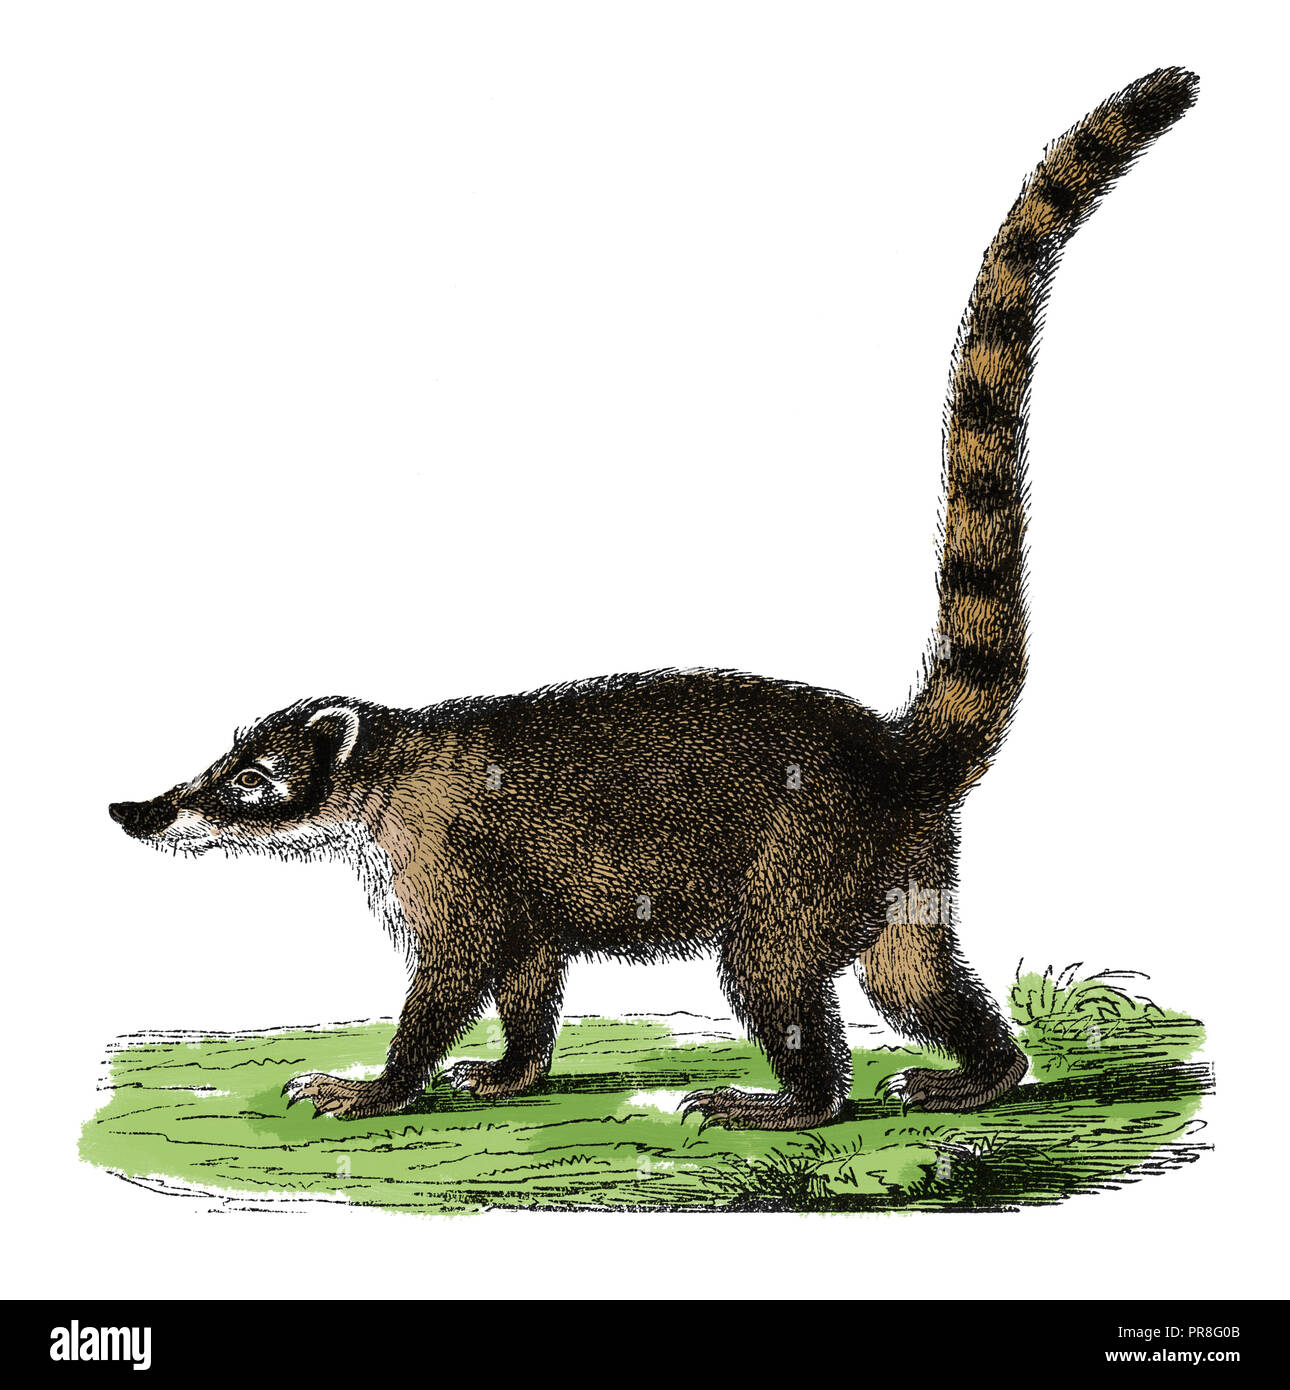 19th century illustration of a coati, also known as coatimundi is members of the raccoon family. Published in Systematischer Bilder-Atlas zum Conversa Stock Photo